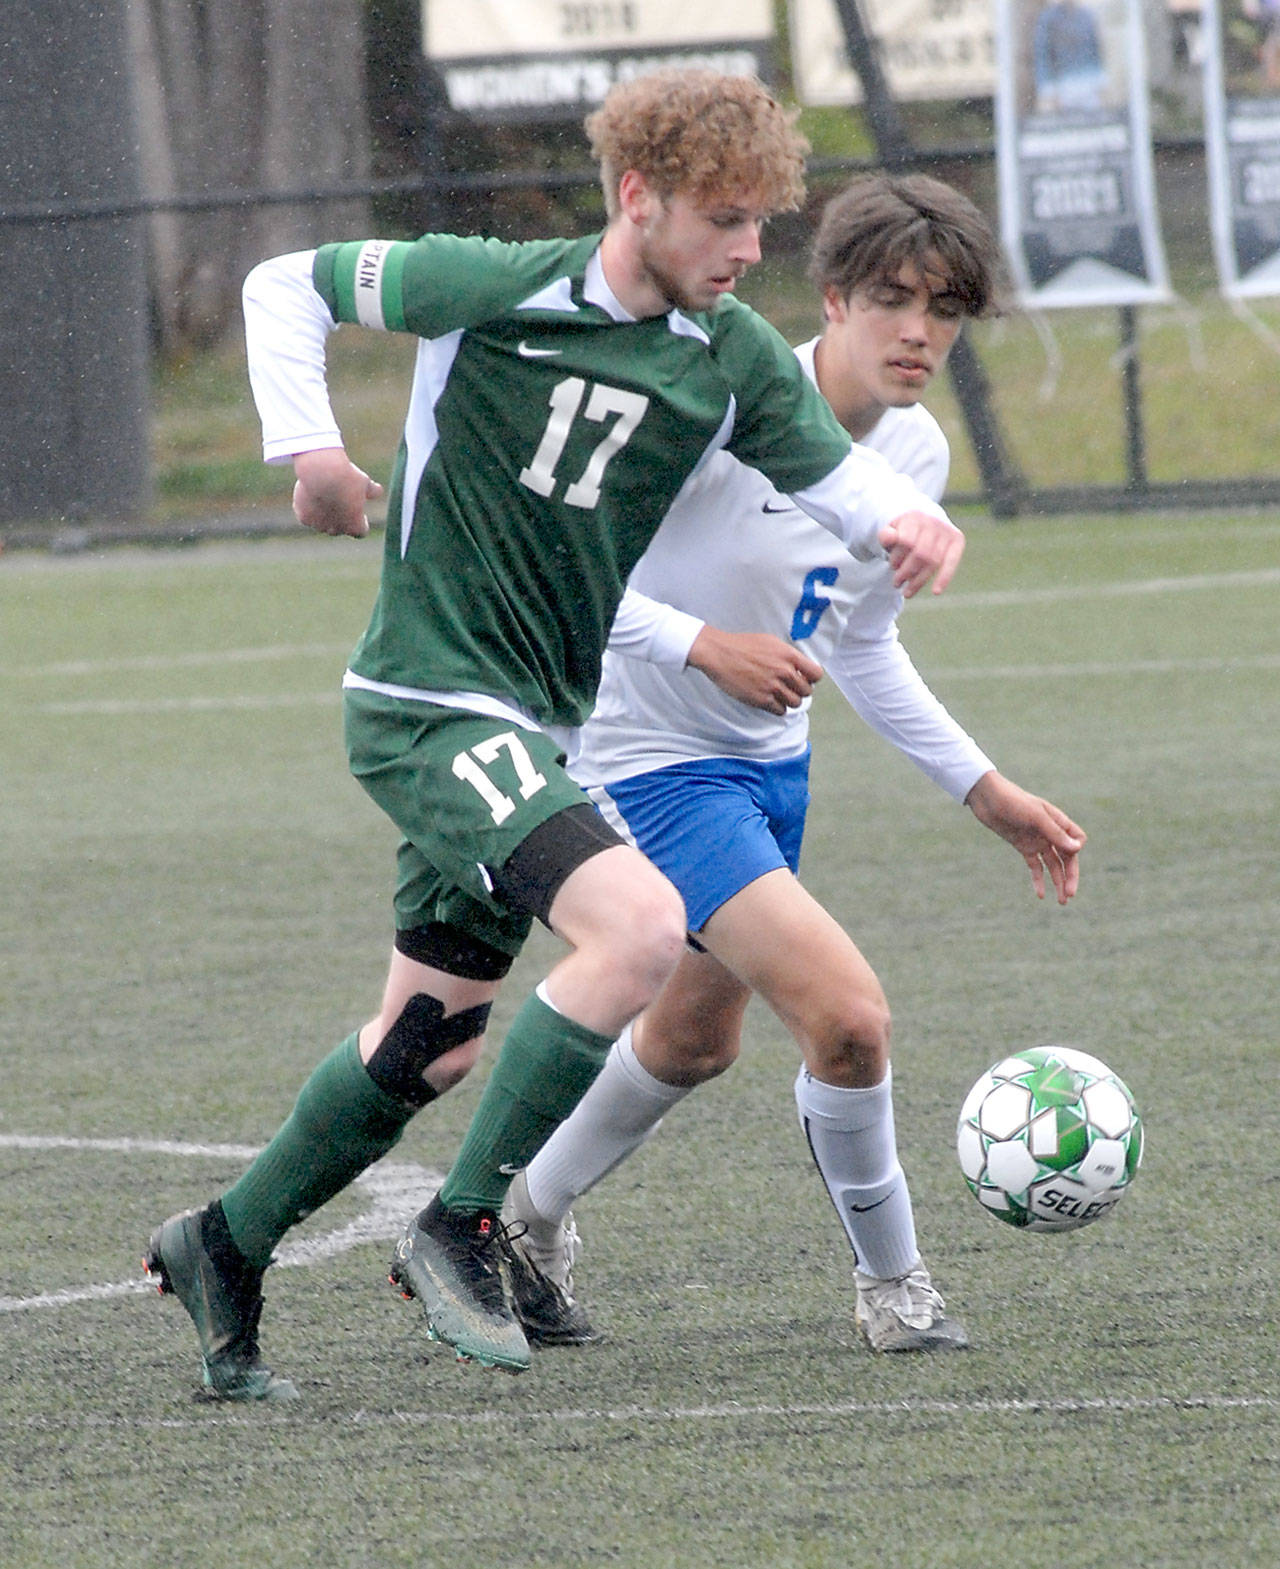 Port Angeles’ Porter Litle, front, races with Bremerton’s Jeffery Pickering for the ball on Saturday in Port Angeles. (Keith Thorpe/Peninsula Daily News)